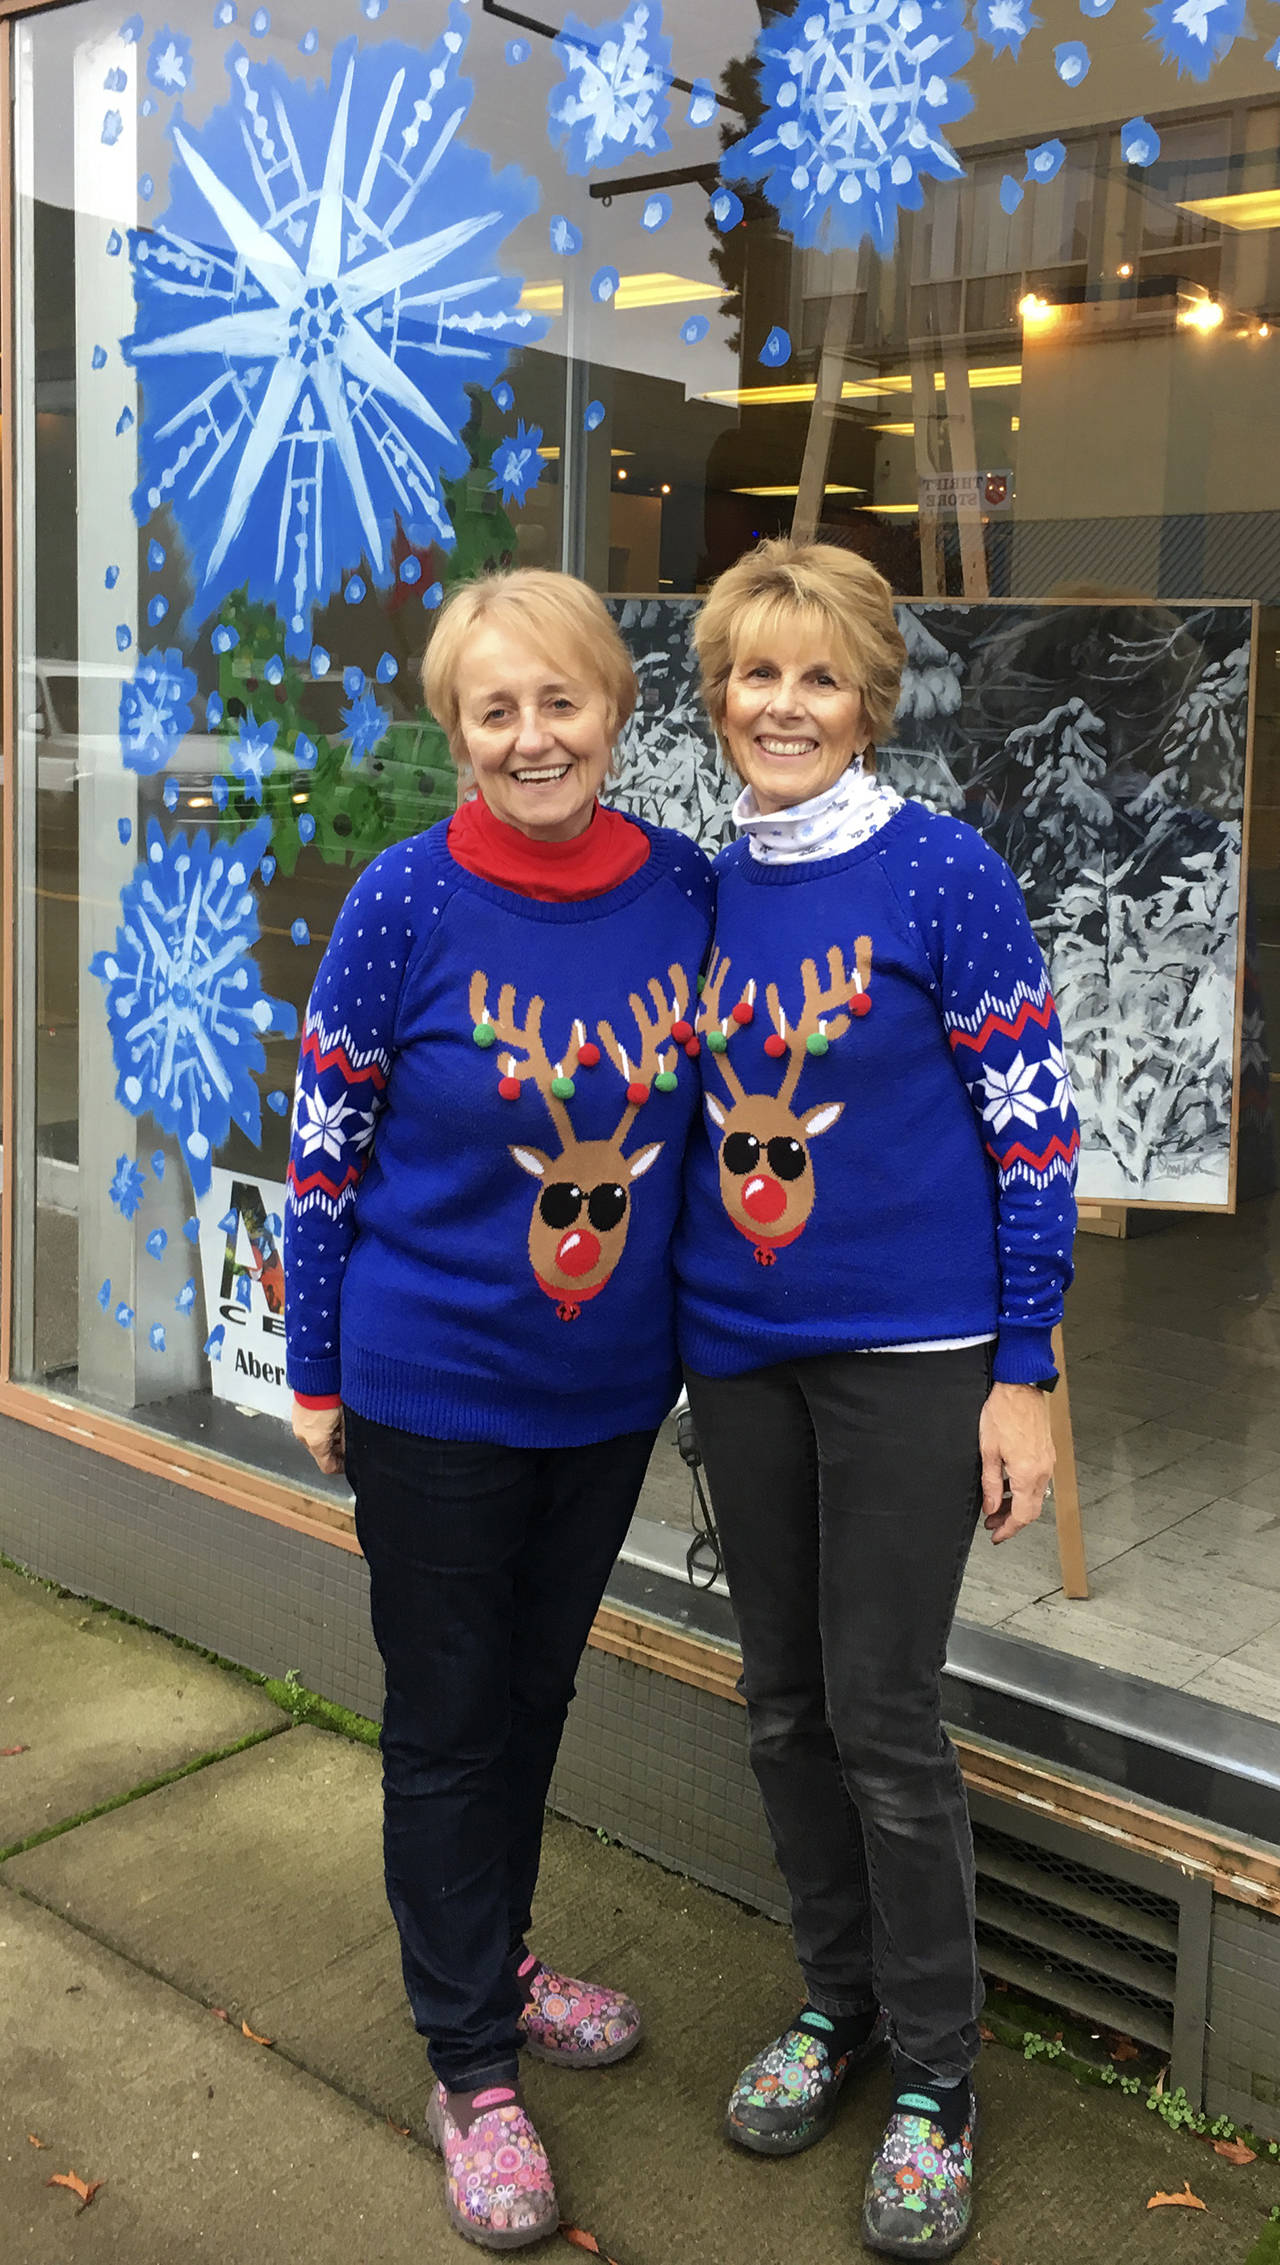 Kat Bryant | The Daily World                                Event co-organizers Bobbi McCracken, left, and Bette Worth stand outside the former site of Goldberg’s Furniture Store, where local artist Douglas Orr of the Aberdeen Art Center decorated the windows in preparation for the Winterfest Market.